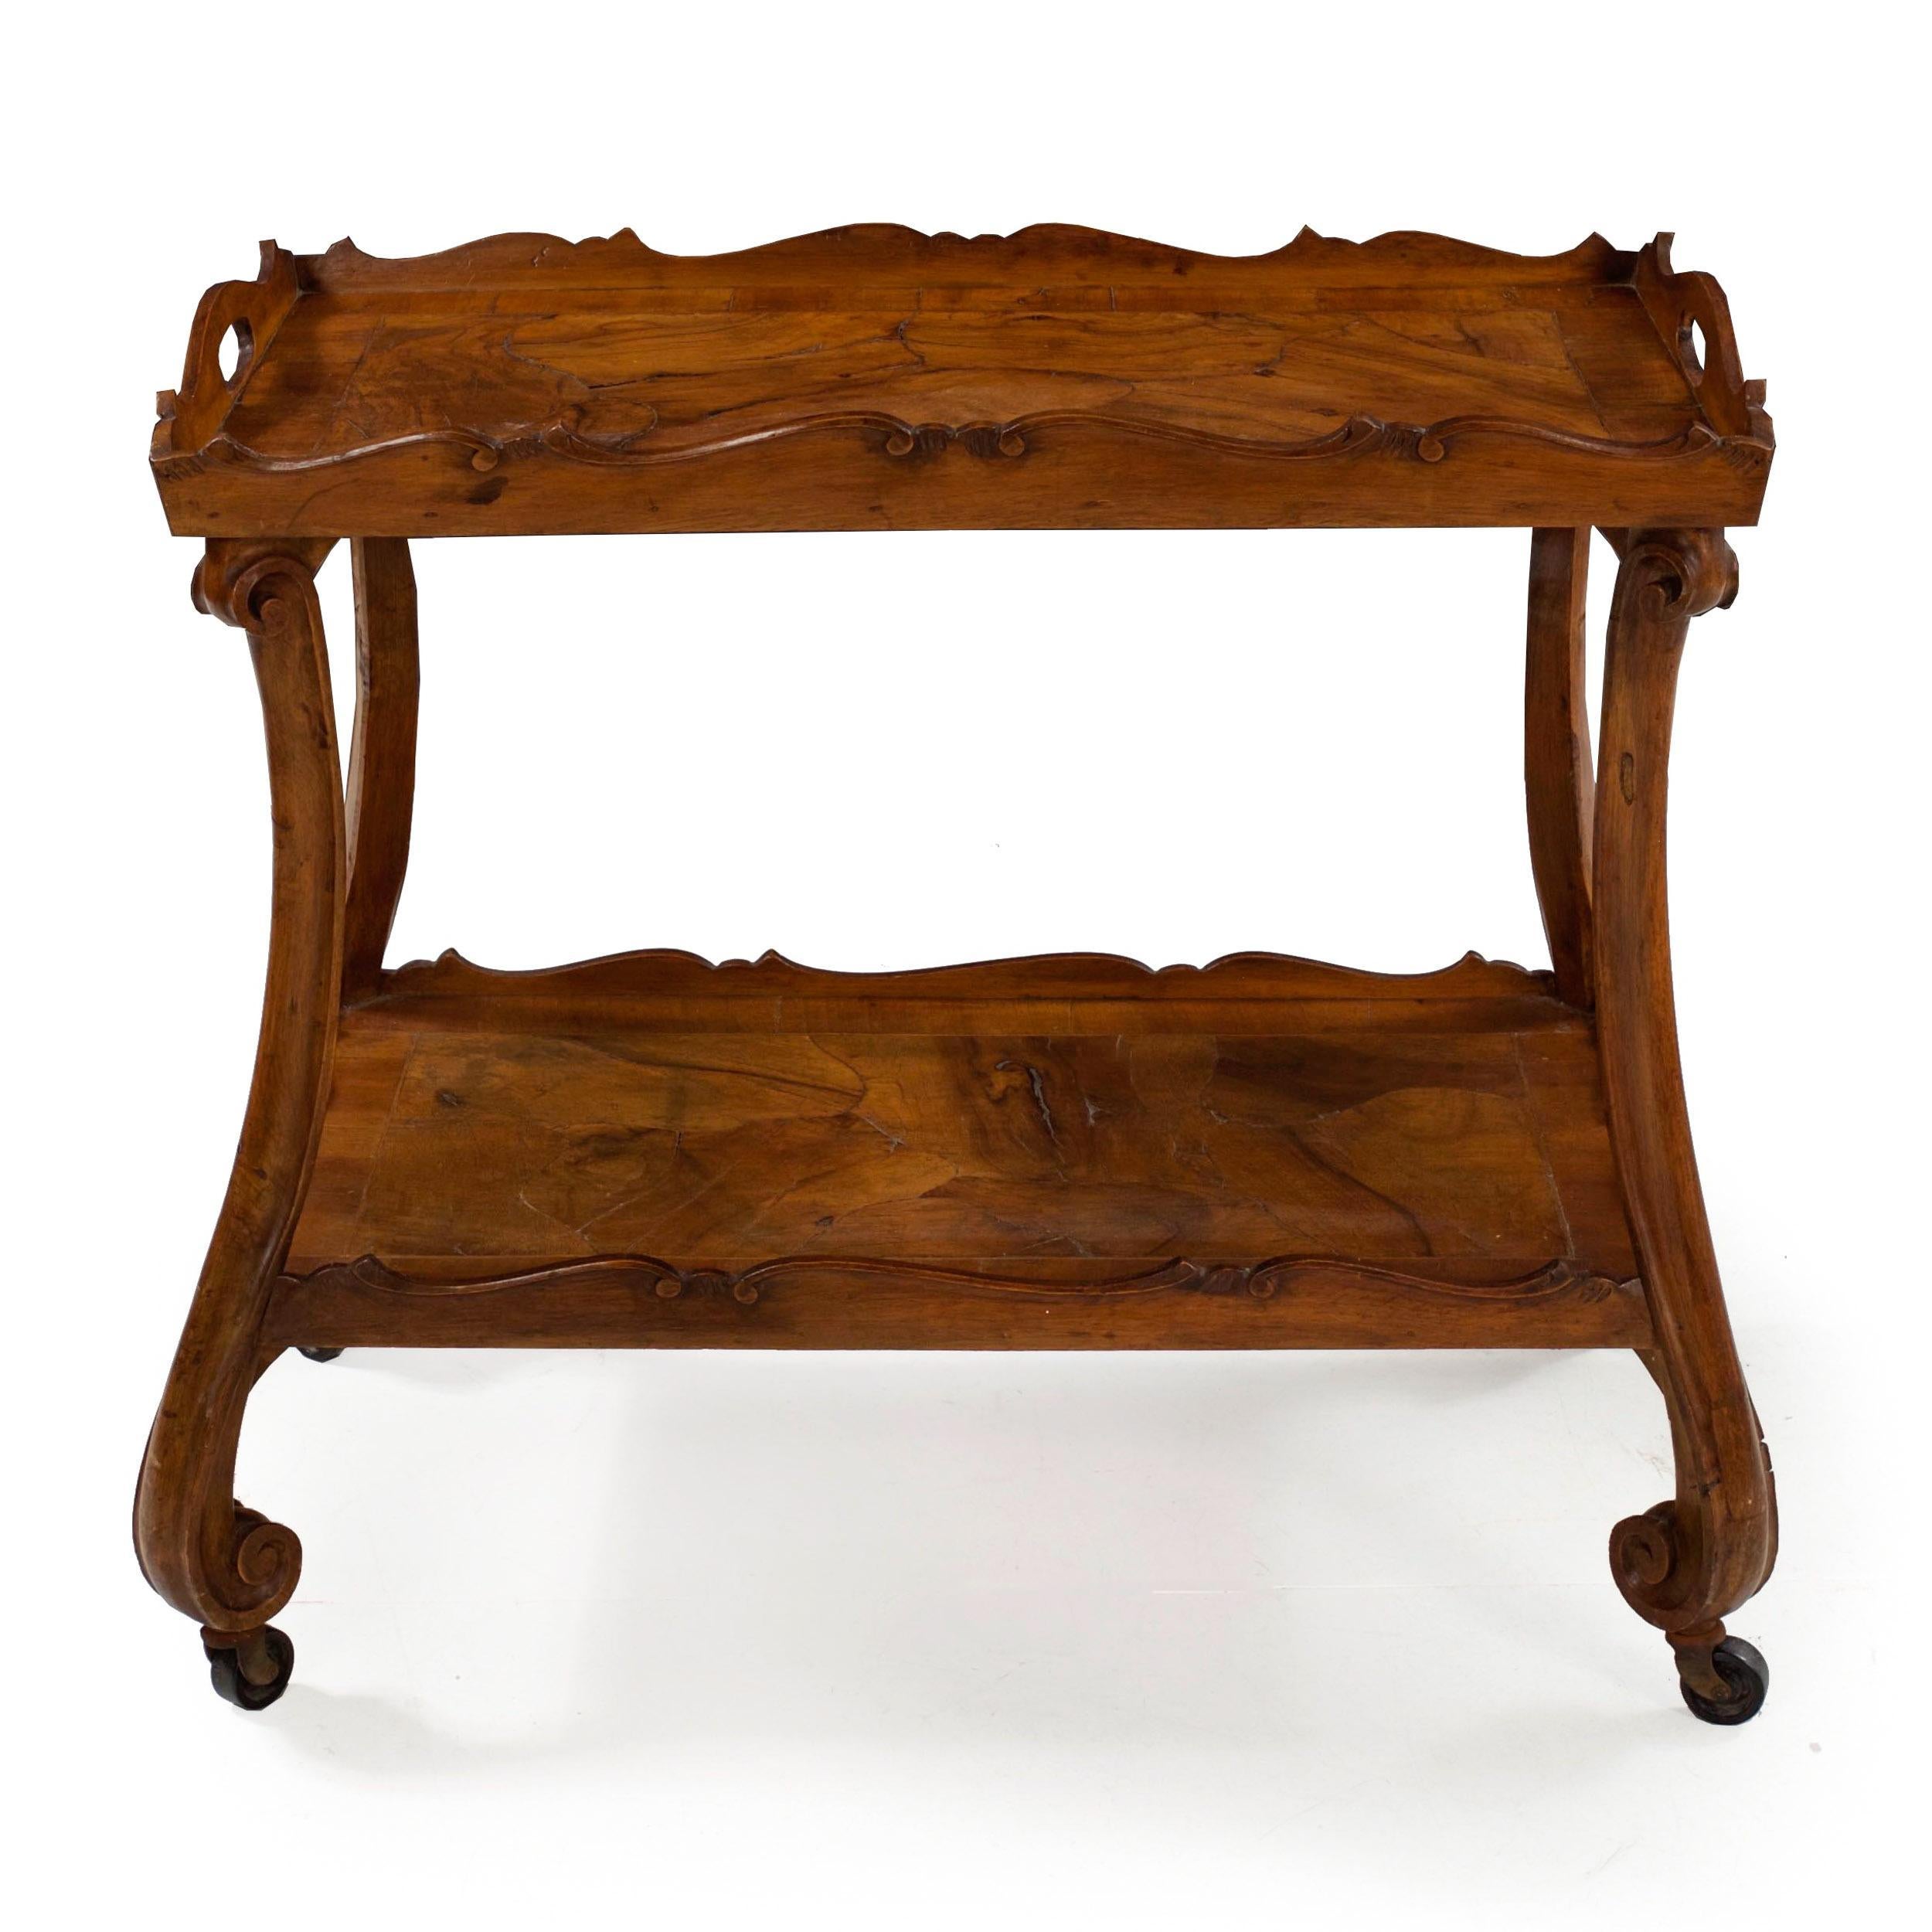 An attractive two-tier serving table designed with slices of unusually thick burl walnut veneers set in chaotic patterns against one another throughout either tray. This is framed in stringer inlays before a low scalloped rim with light incised